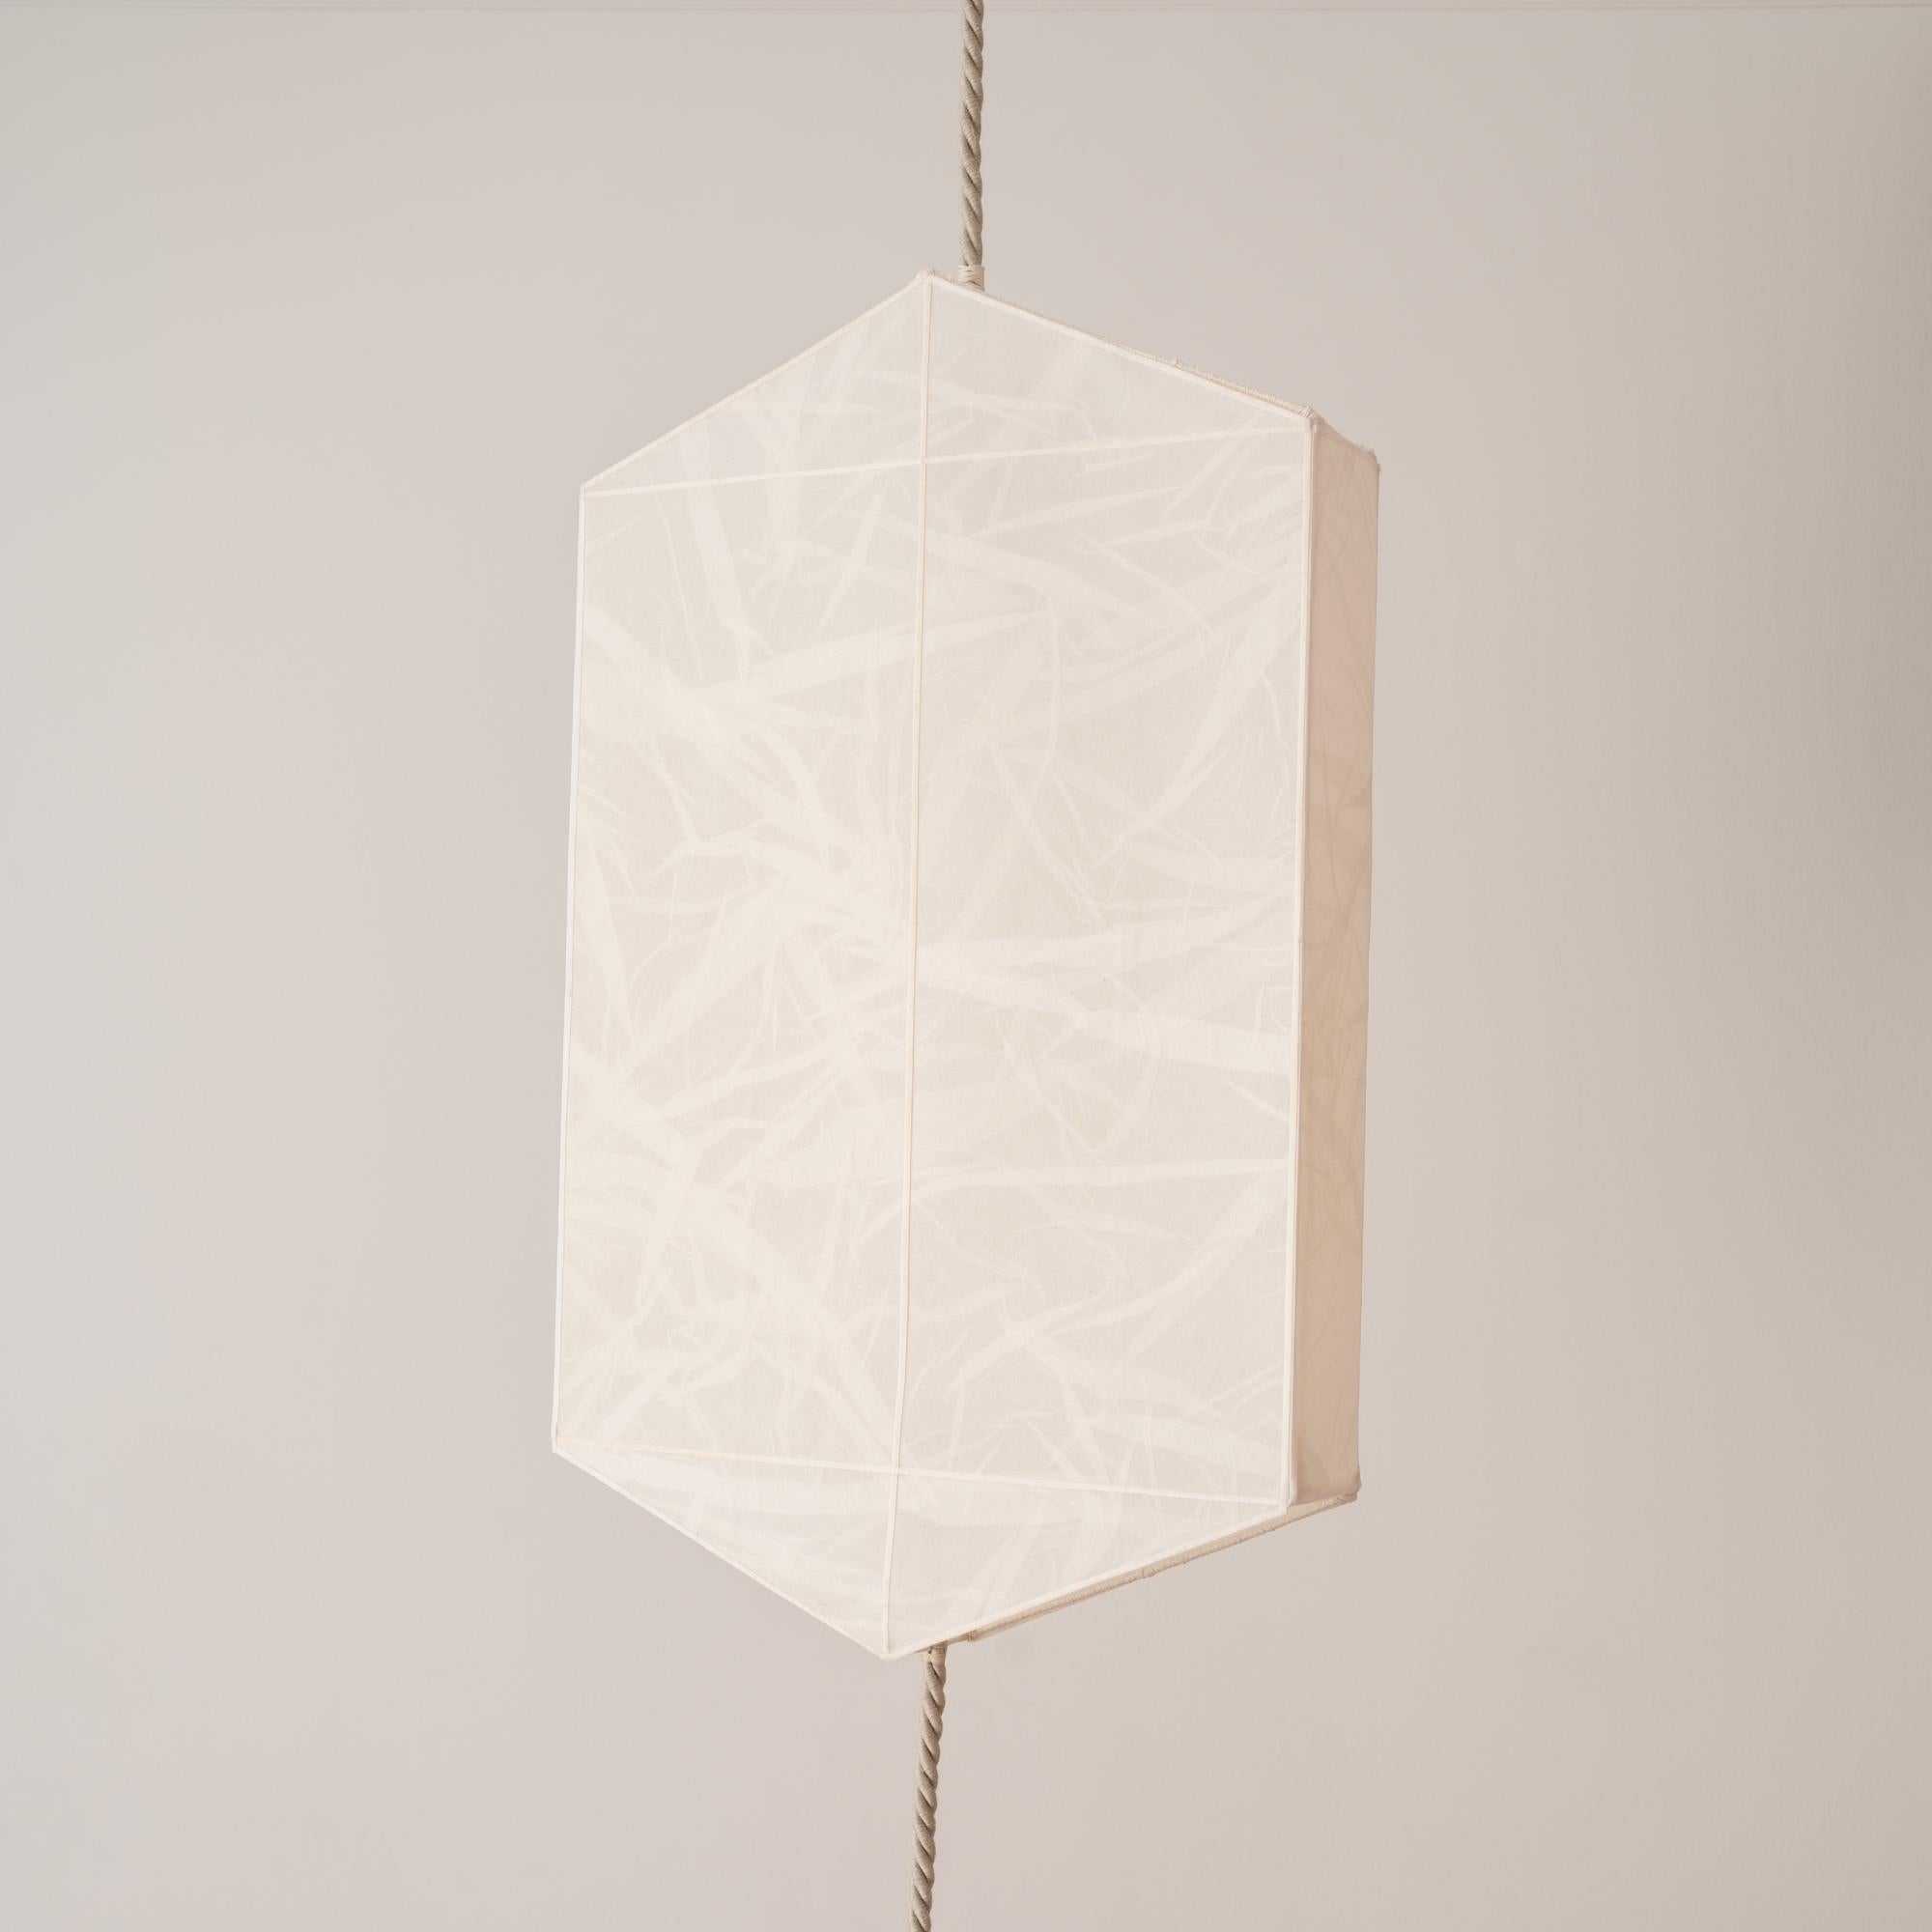 One-of-a-Kind Hanging Lantern-style Lamp in Silk Organza, Rope and Raw Stone In New Condition For Sale In New York, NY